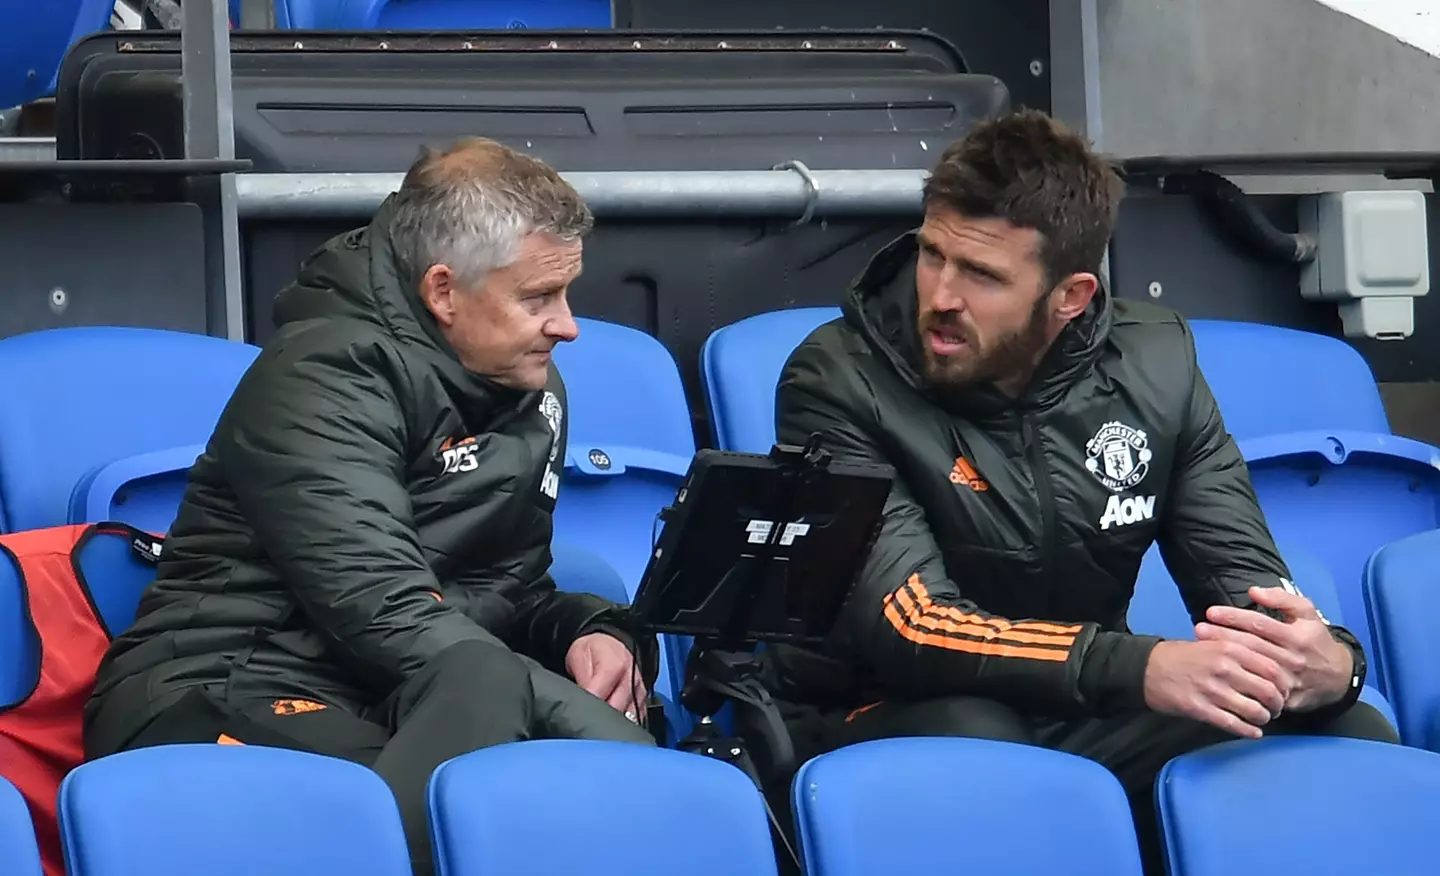 Solskjaer and Carrick plot their next move. Image: PA Images